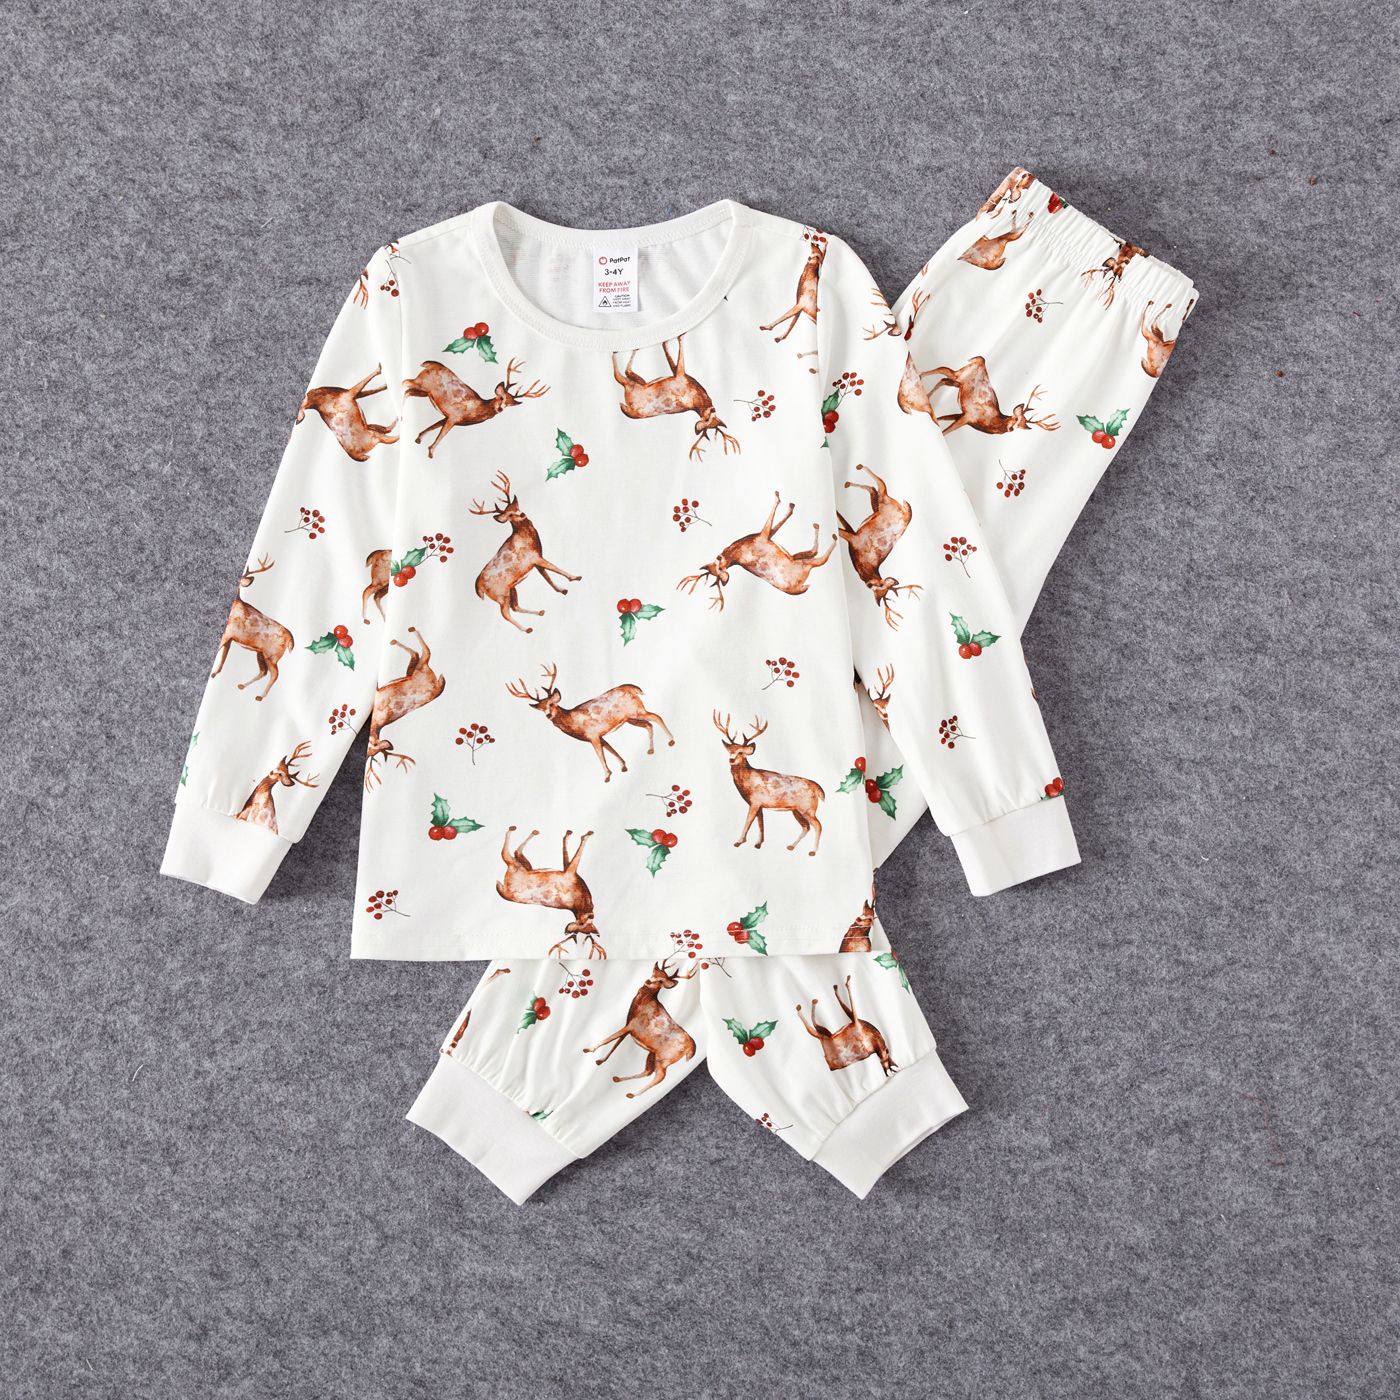 Christmas Family Matching Reindeer & Letter Print Long-sleeve Naiatm Pajamas Sets (Flame Resistant)